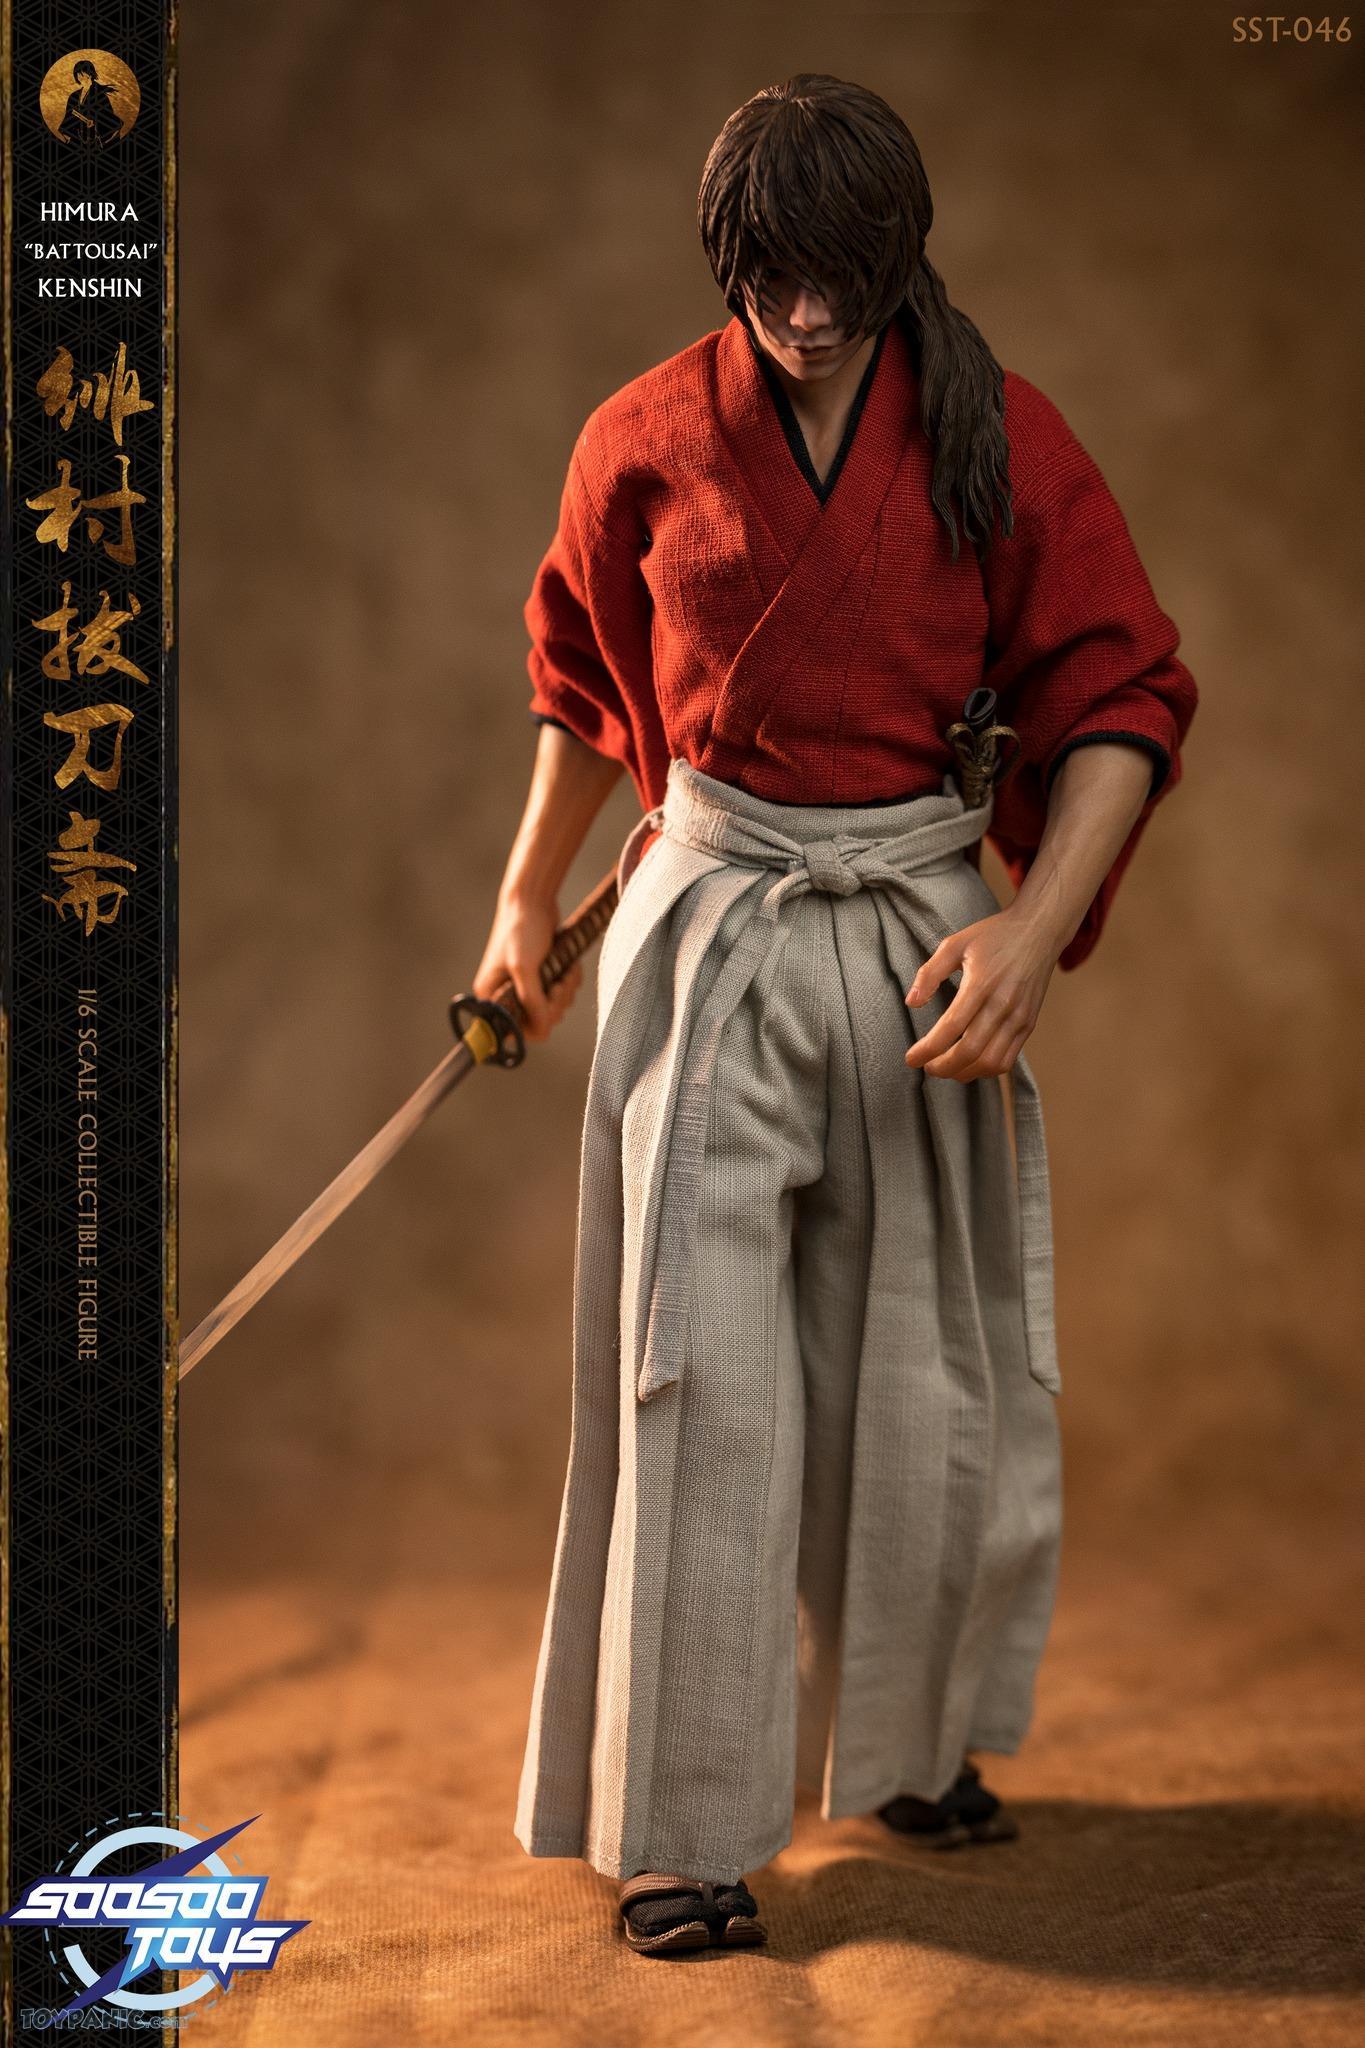 NEW PRODUCT: 1/6 scale Rurouni Kenshin Collectible Figure from SooSooToys 712202251232PM_5173529